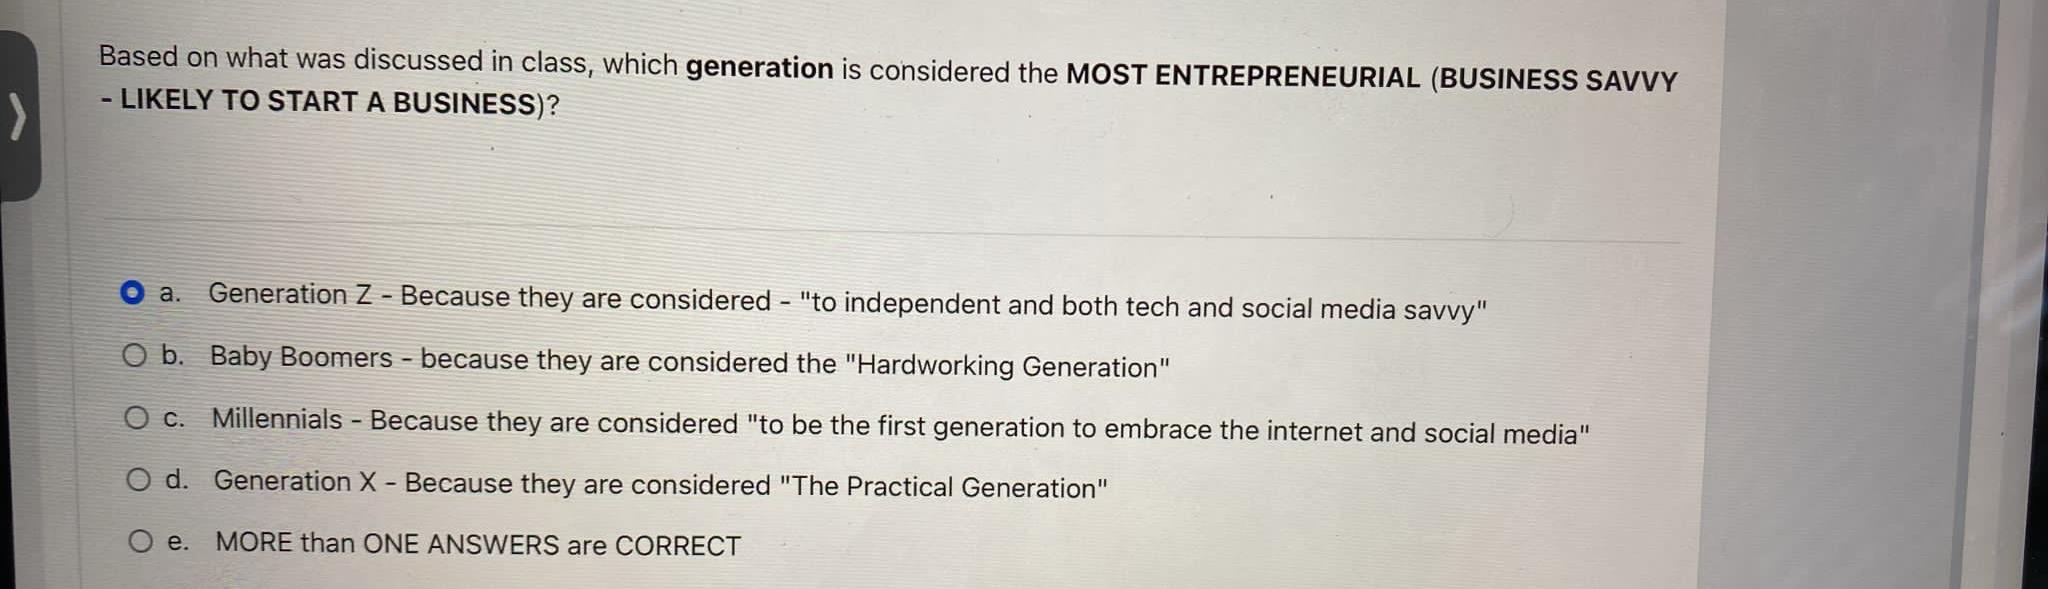 Based on what was discussed in class, which generation is considered the MOST ENTREPRENEURIAL (BUSINESS SAVVY